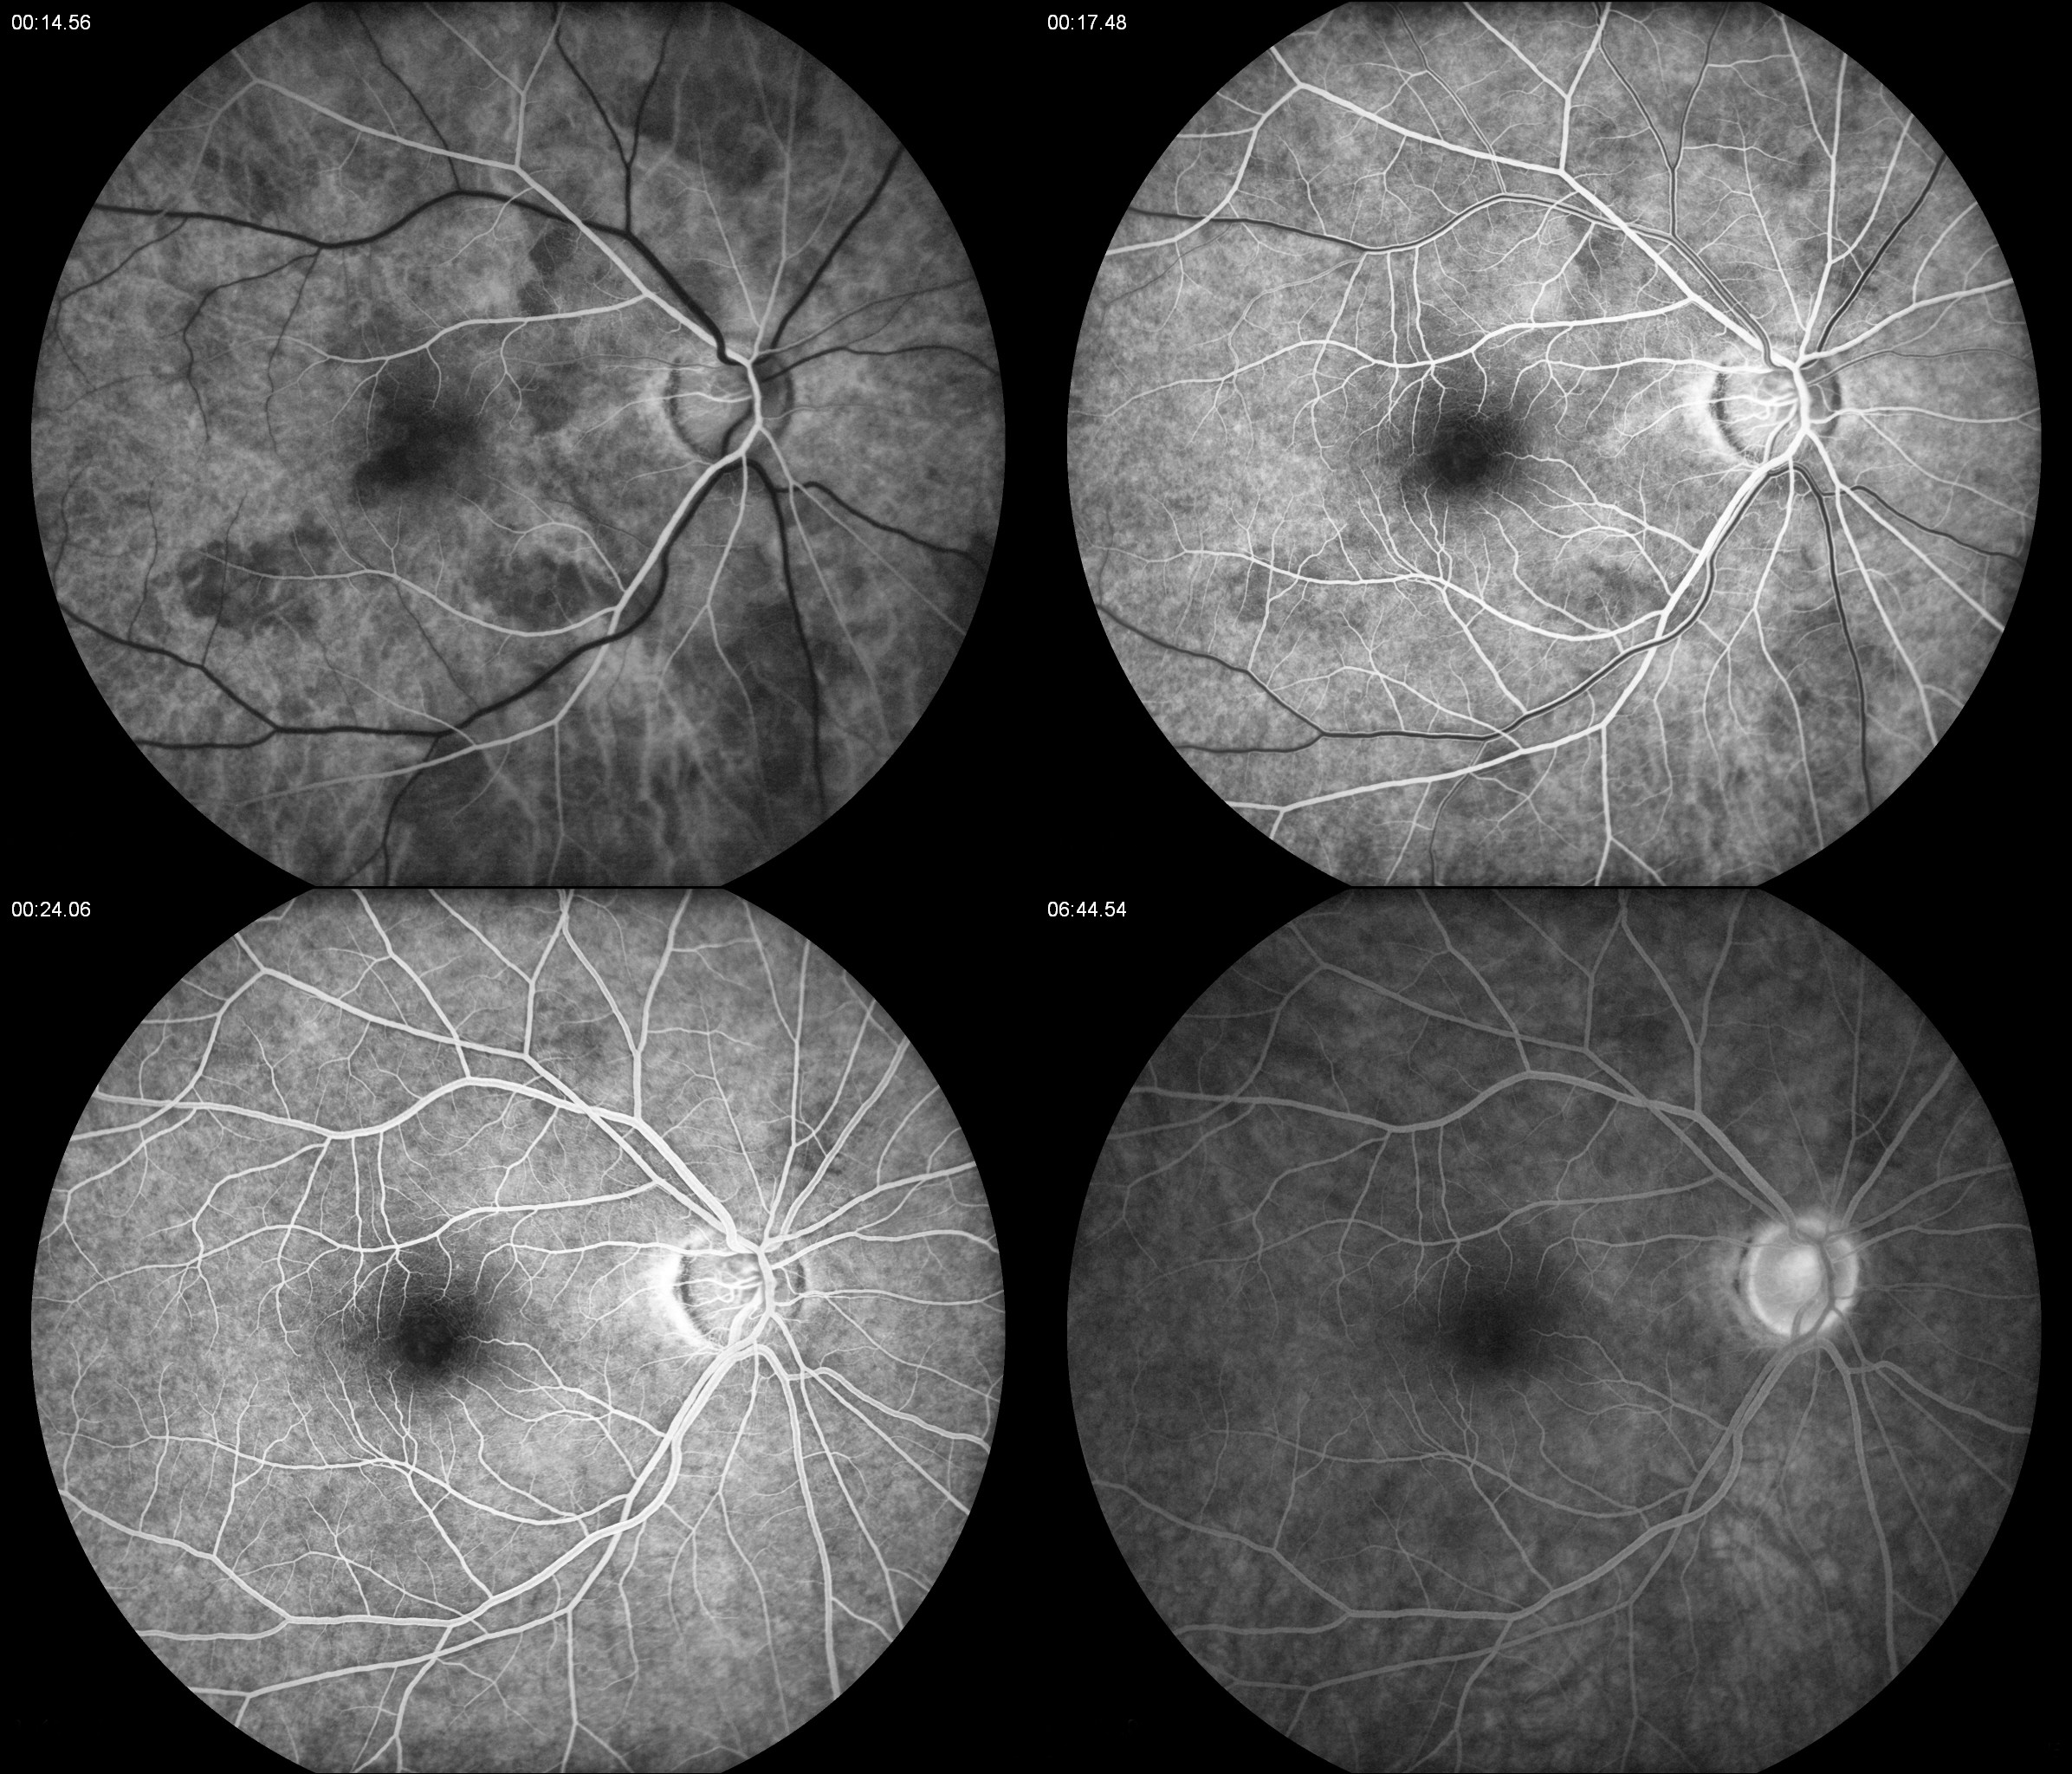 Figure 9.8.1 Phases of a Normal Fundus Fluorescein Angiogram